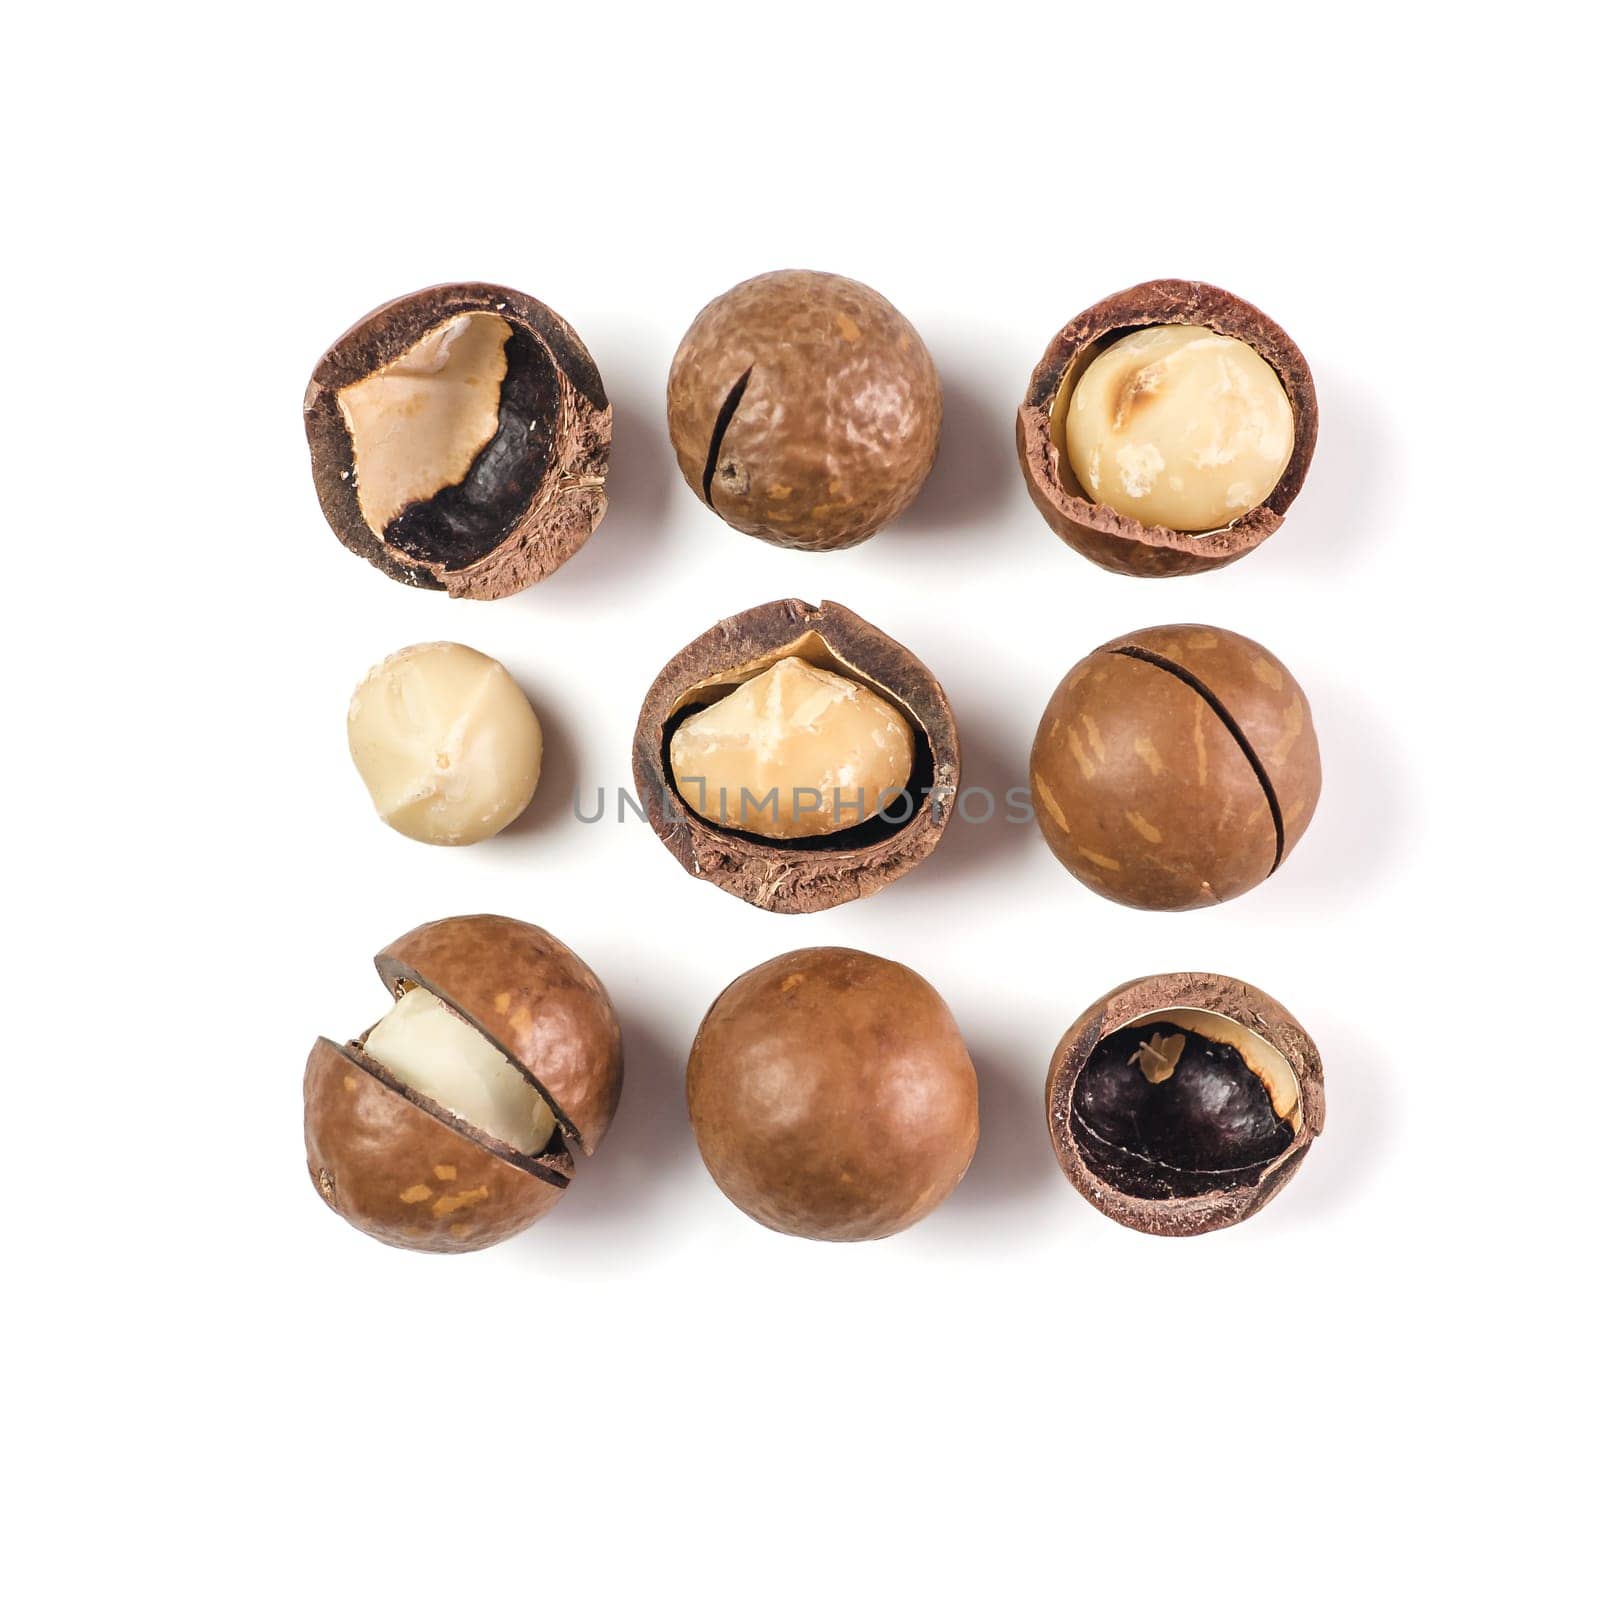 Heap of macadamia nuts on white background with clipping path.. Set of peeled and unpeeled macadamia nuts isolated on white, top view or flat lay. Square. Copy space for text.